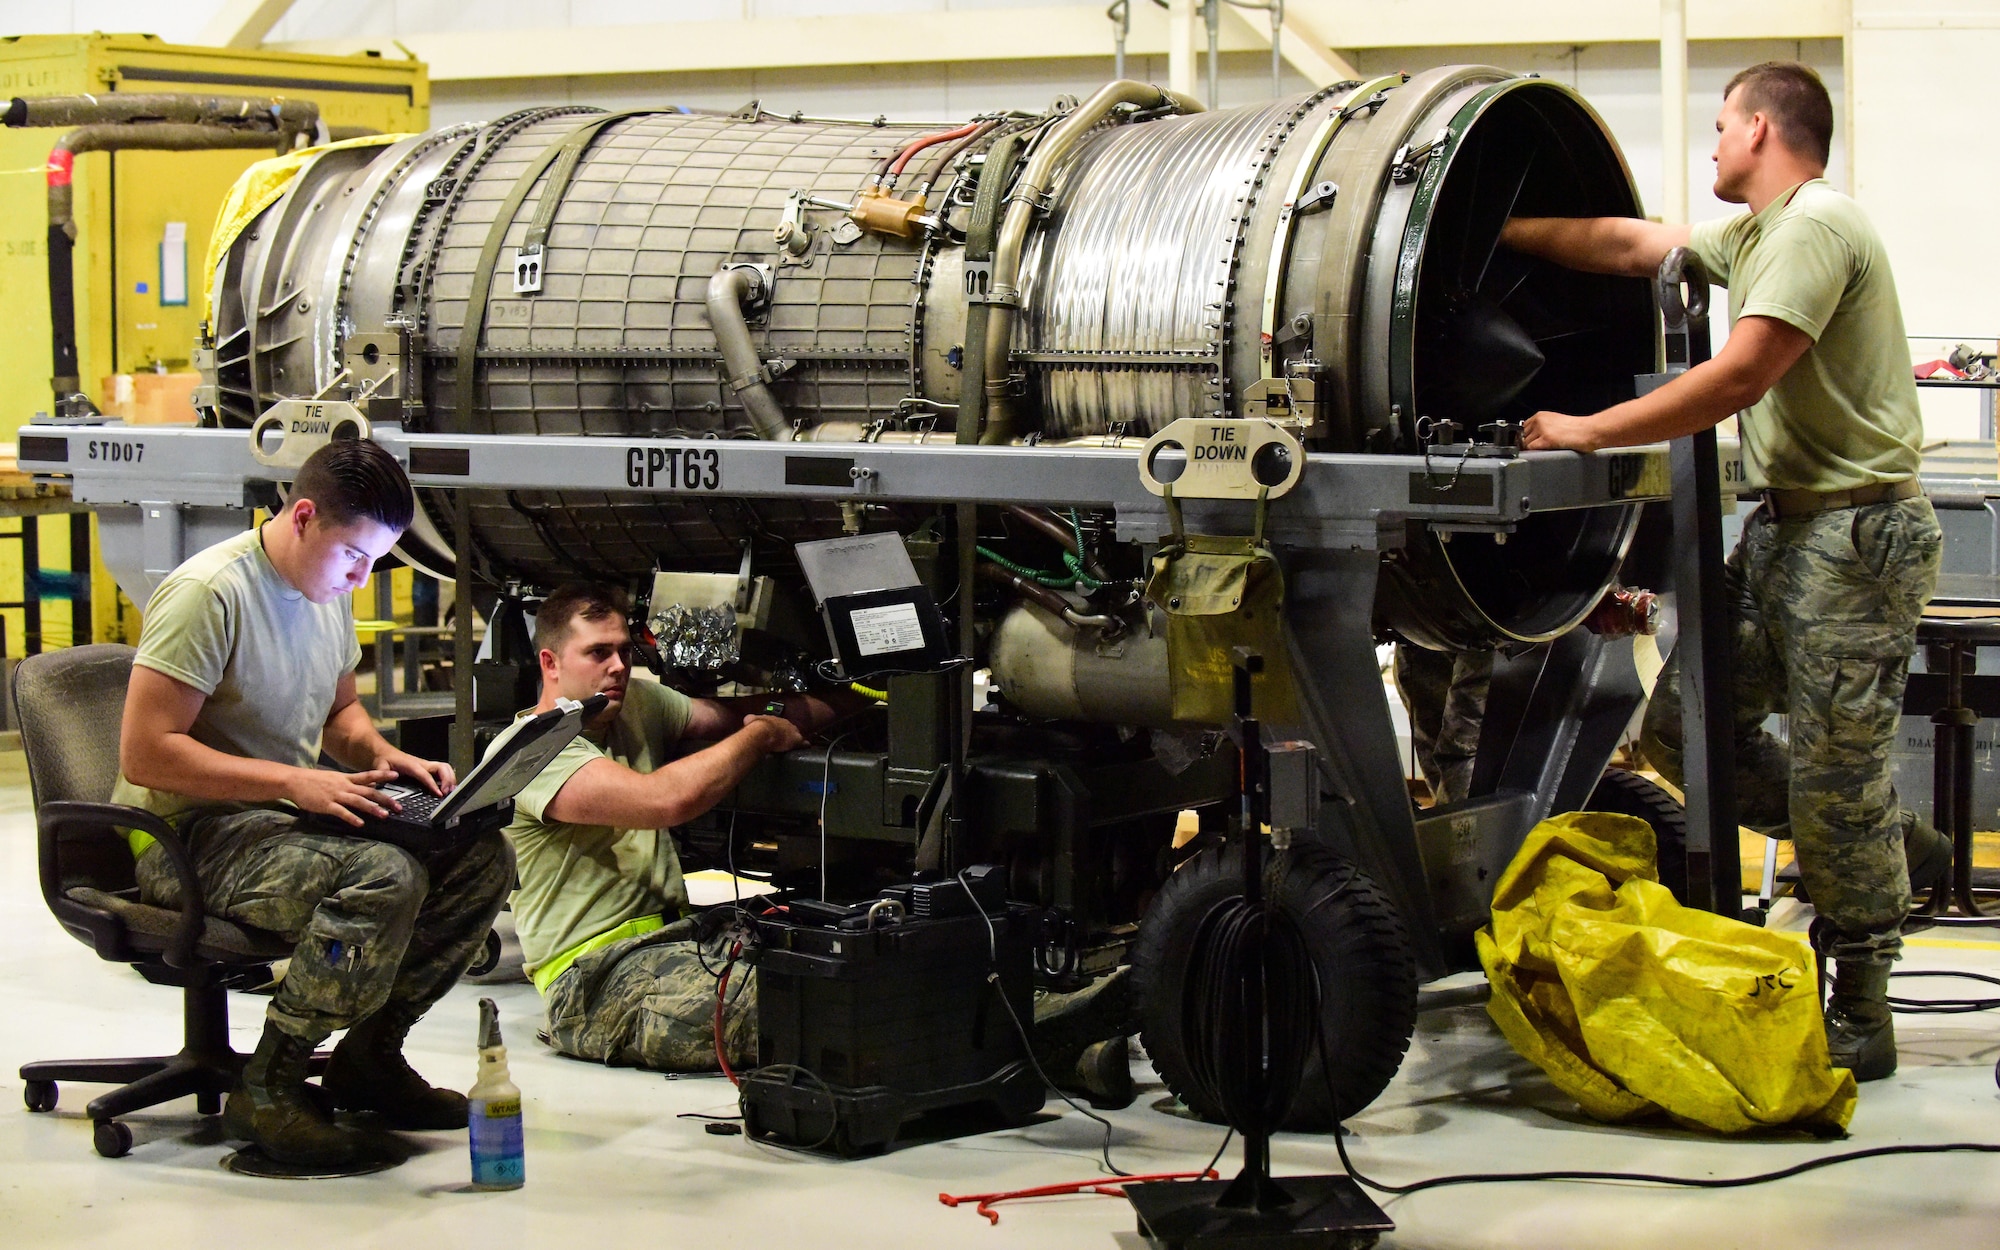 Aircraft propulsion system specialist with the 509th Aircraft Maintenance Squadron inspect the interior of a B-2 Spirit engine at Whiteman Air Force Base, Mo., July 27, 2017. The inspection was performed to determine the serviceability of the engine before it was installed into a B-2.